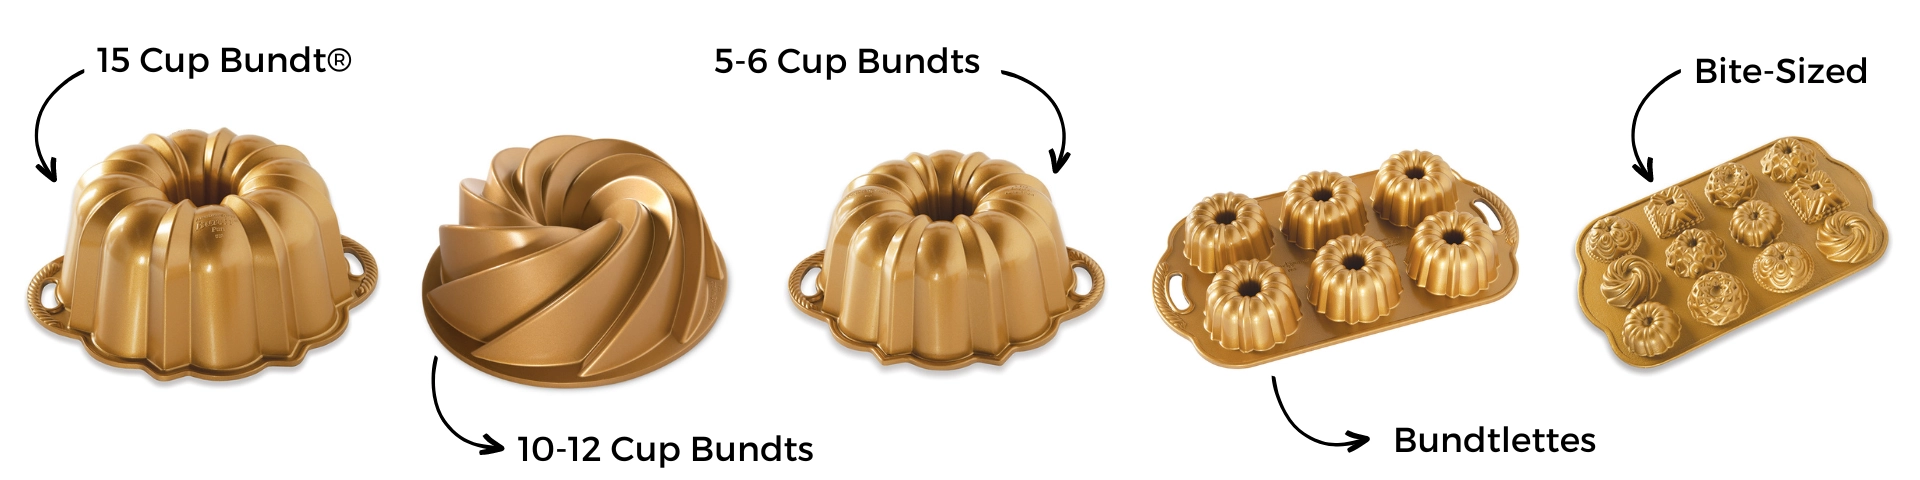 Bundts in different shapes and sizes